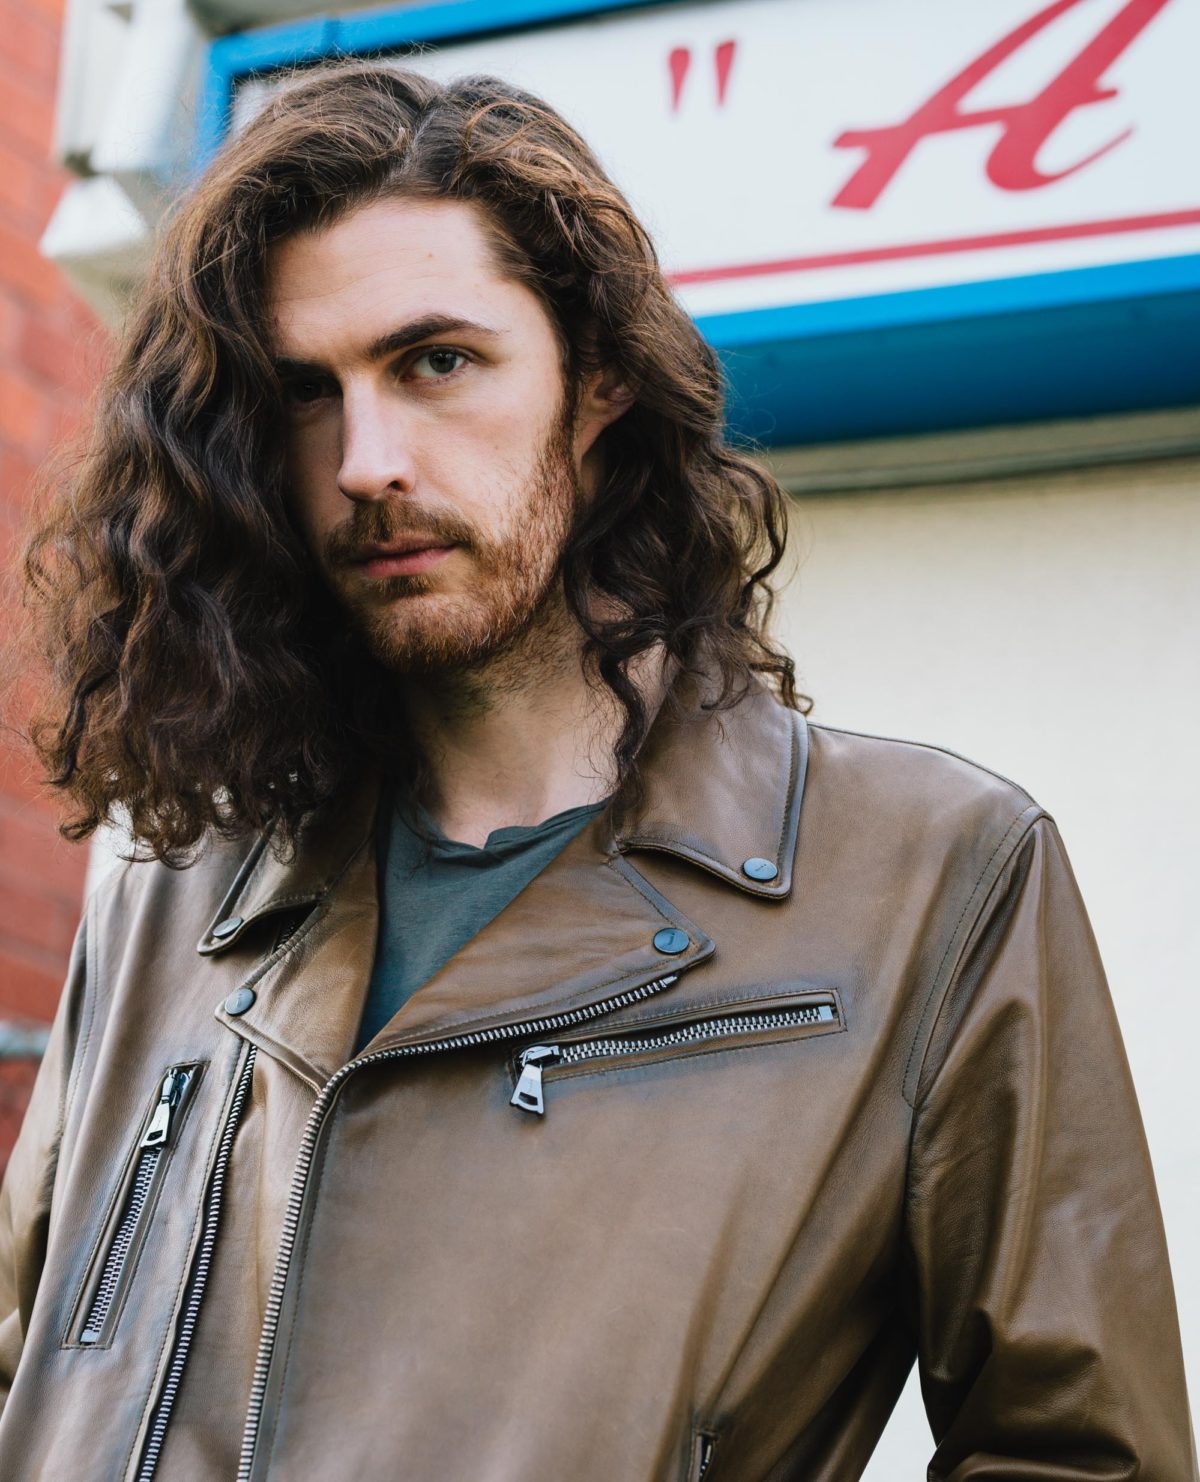 Win a Virtual Coffee Date with Hozier!